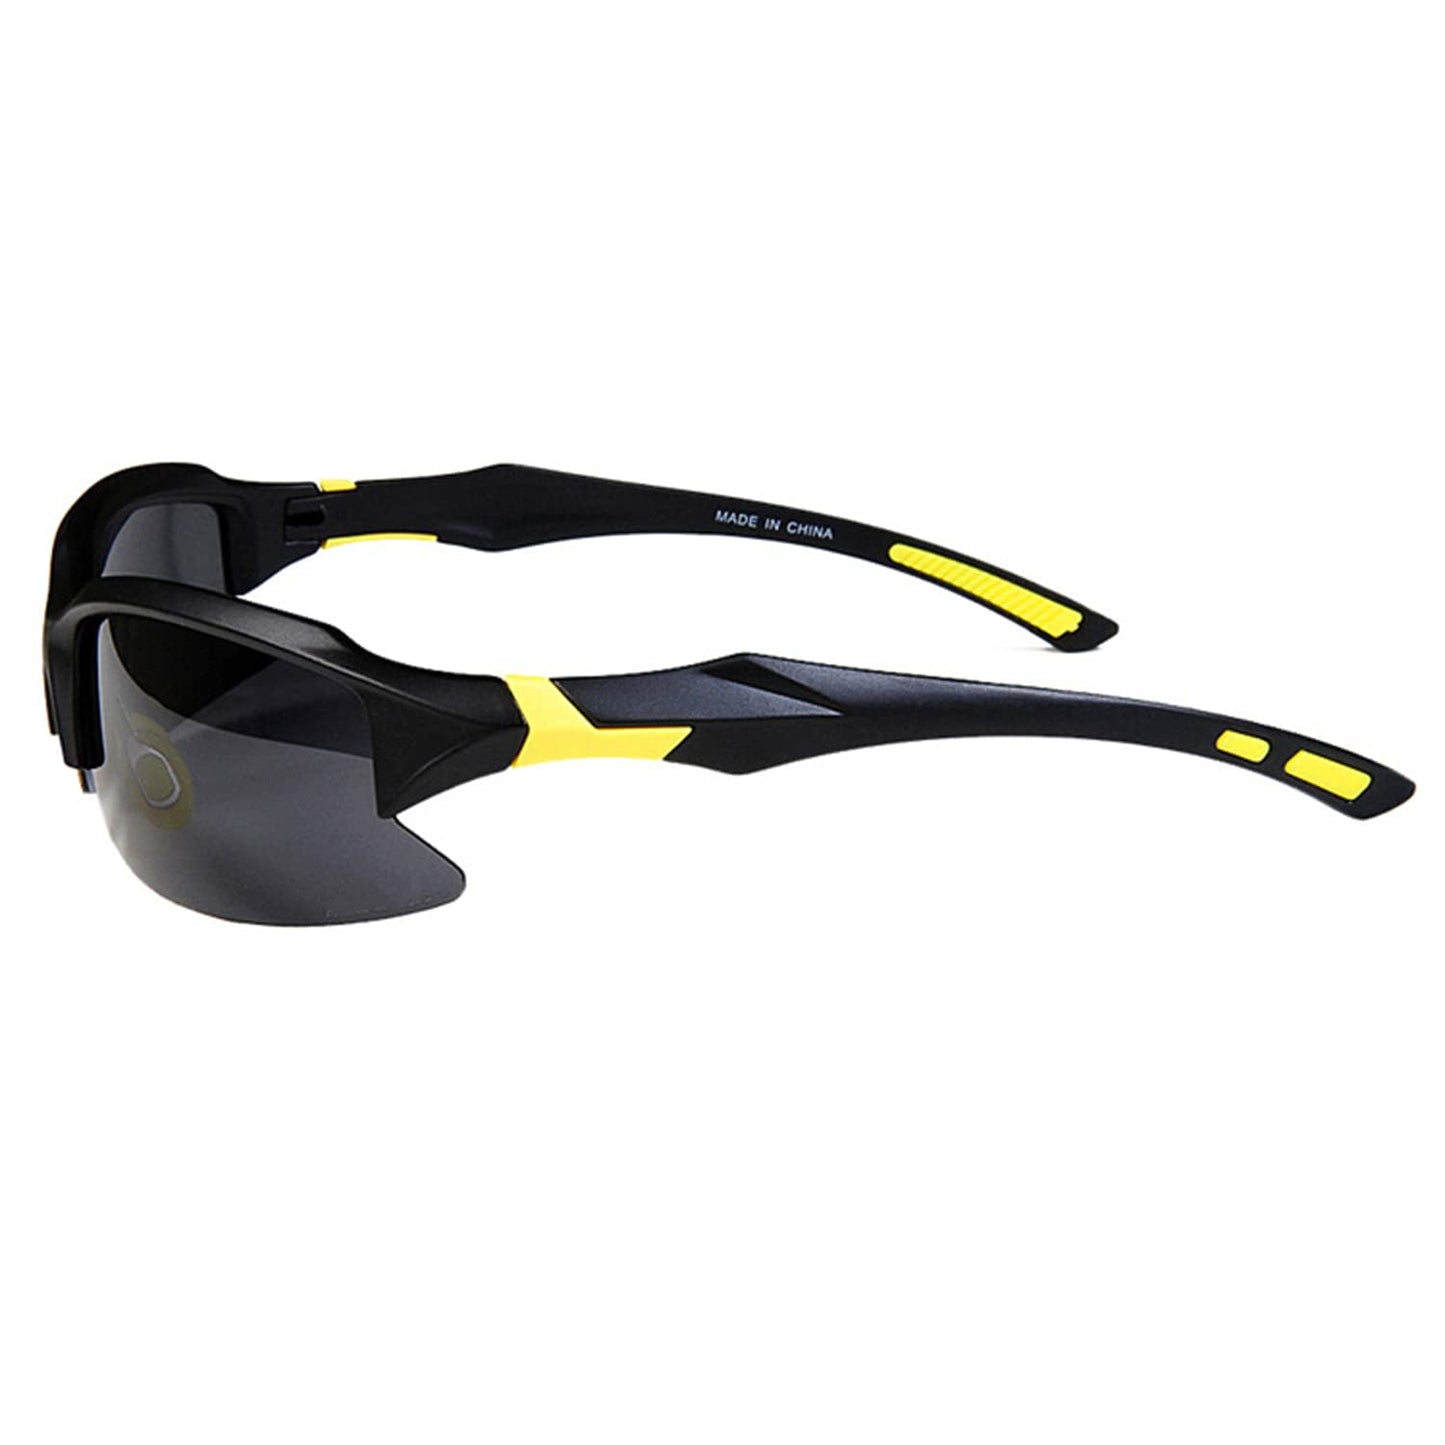 eWINNER Men and Women's Professional Polarized Lens Outdoor Safety Glasses for Sports, Bicycle